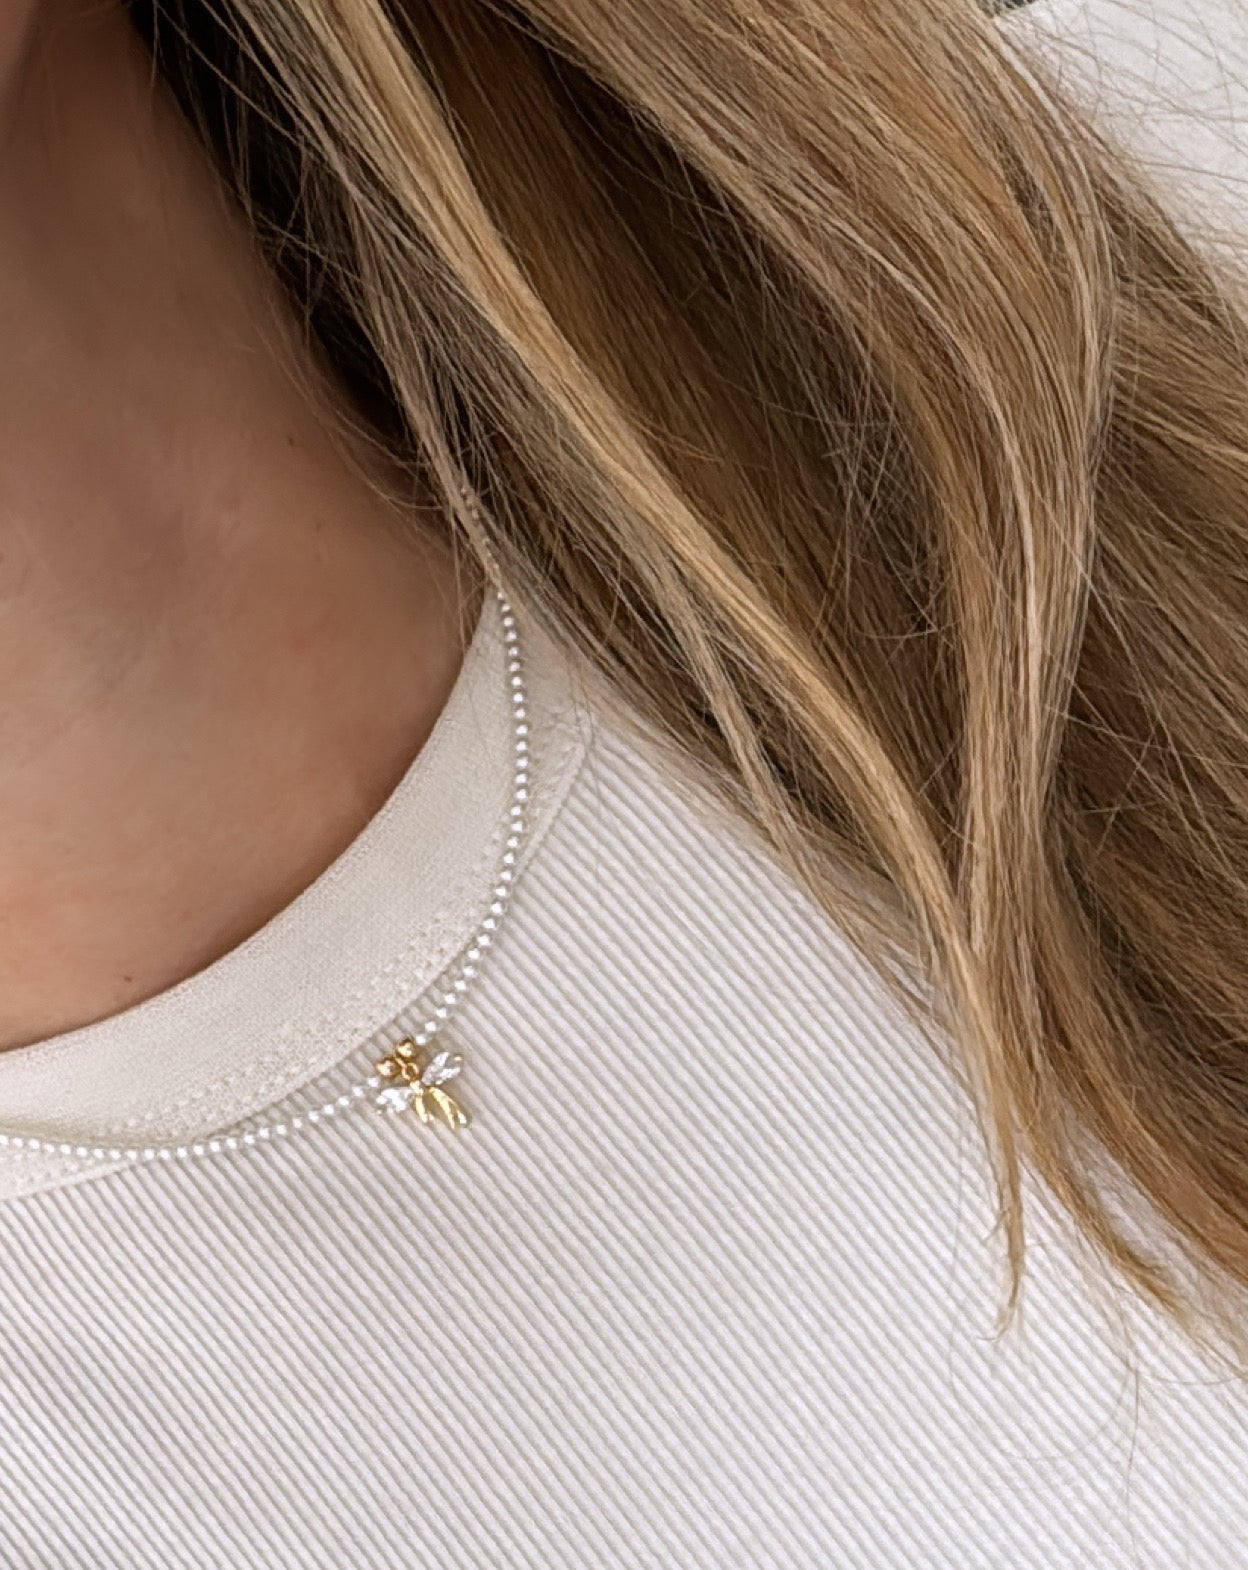 Bow mini Pearls Necklace